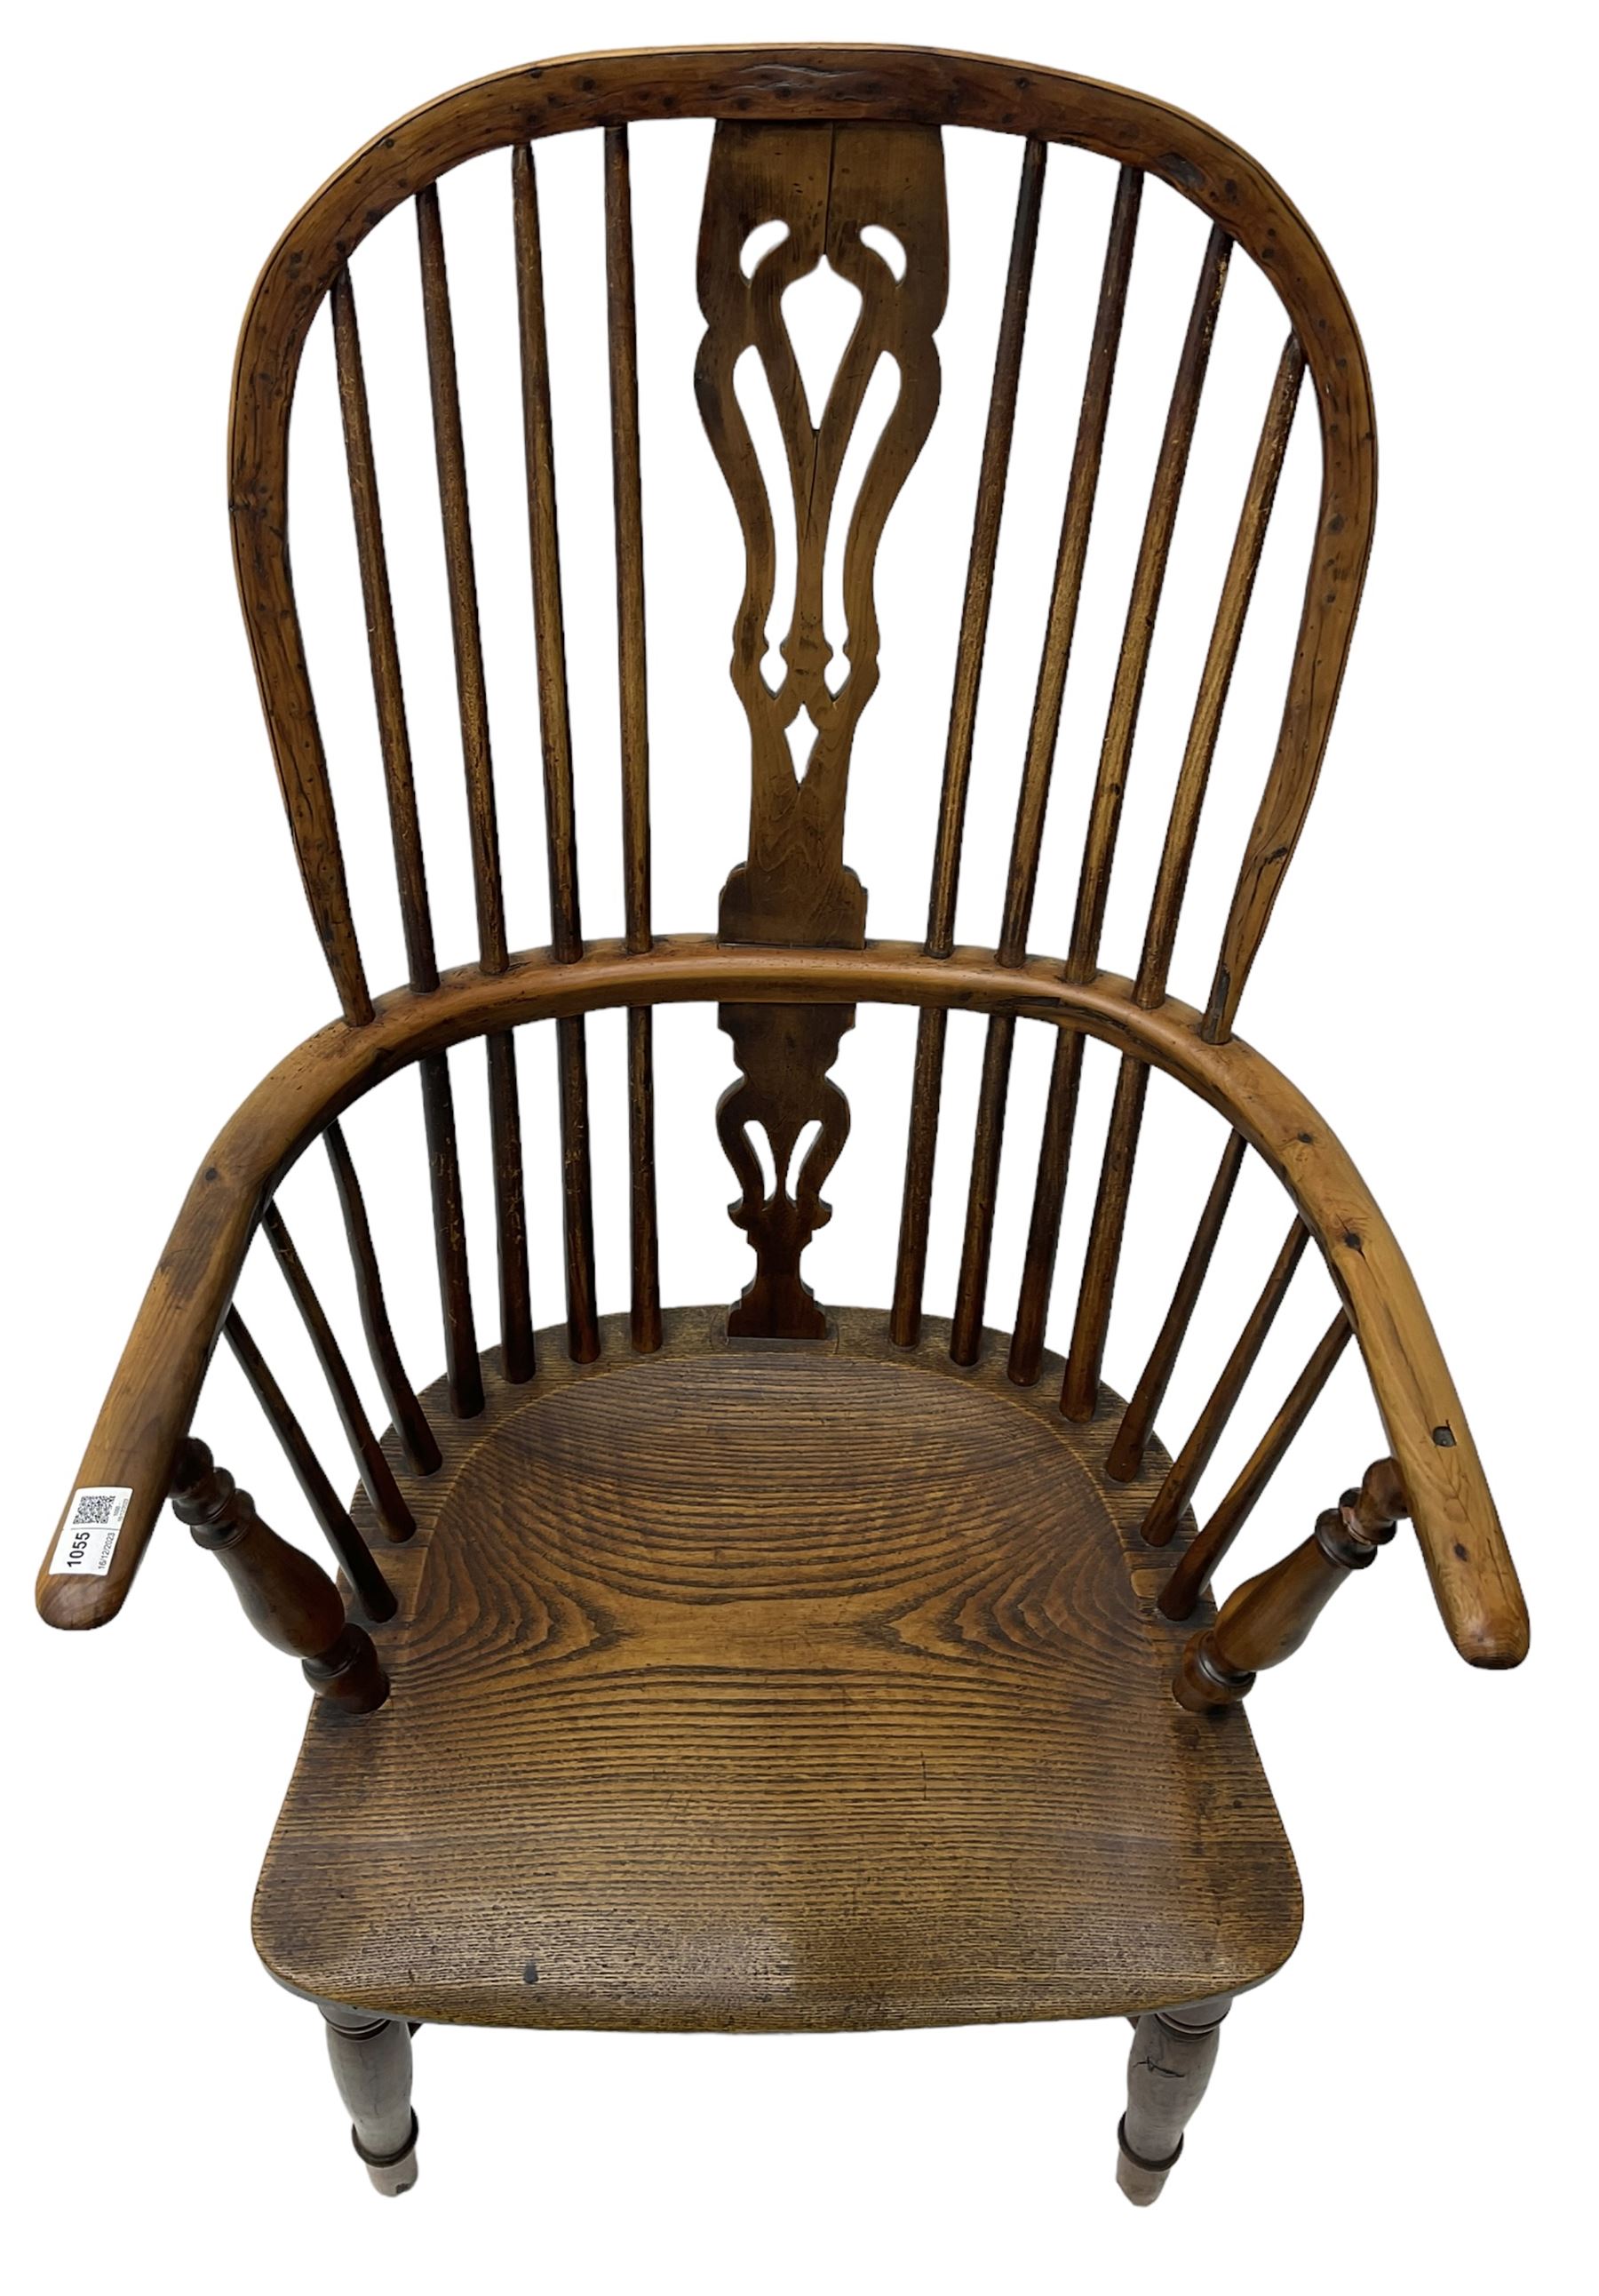 19th century yew wood and elm Windsor chair - Image 3 of 7